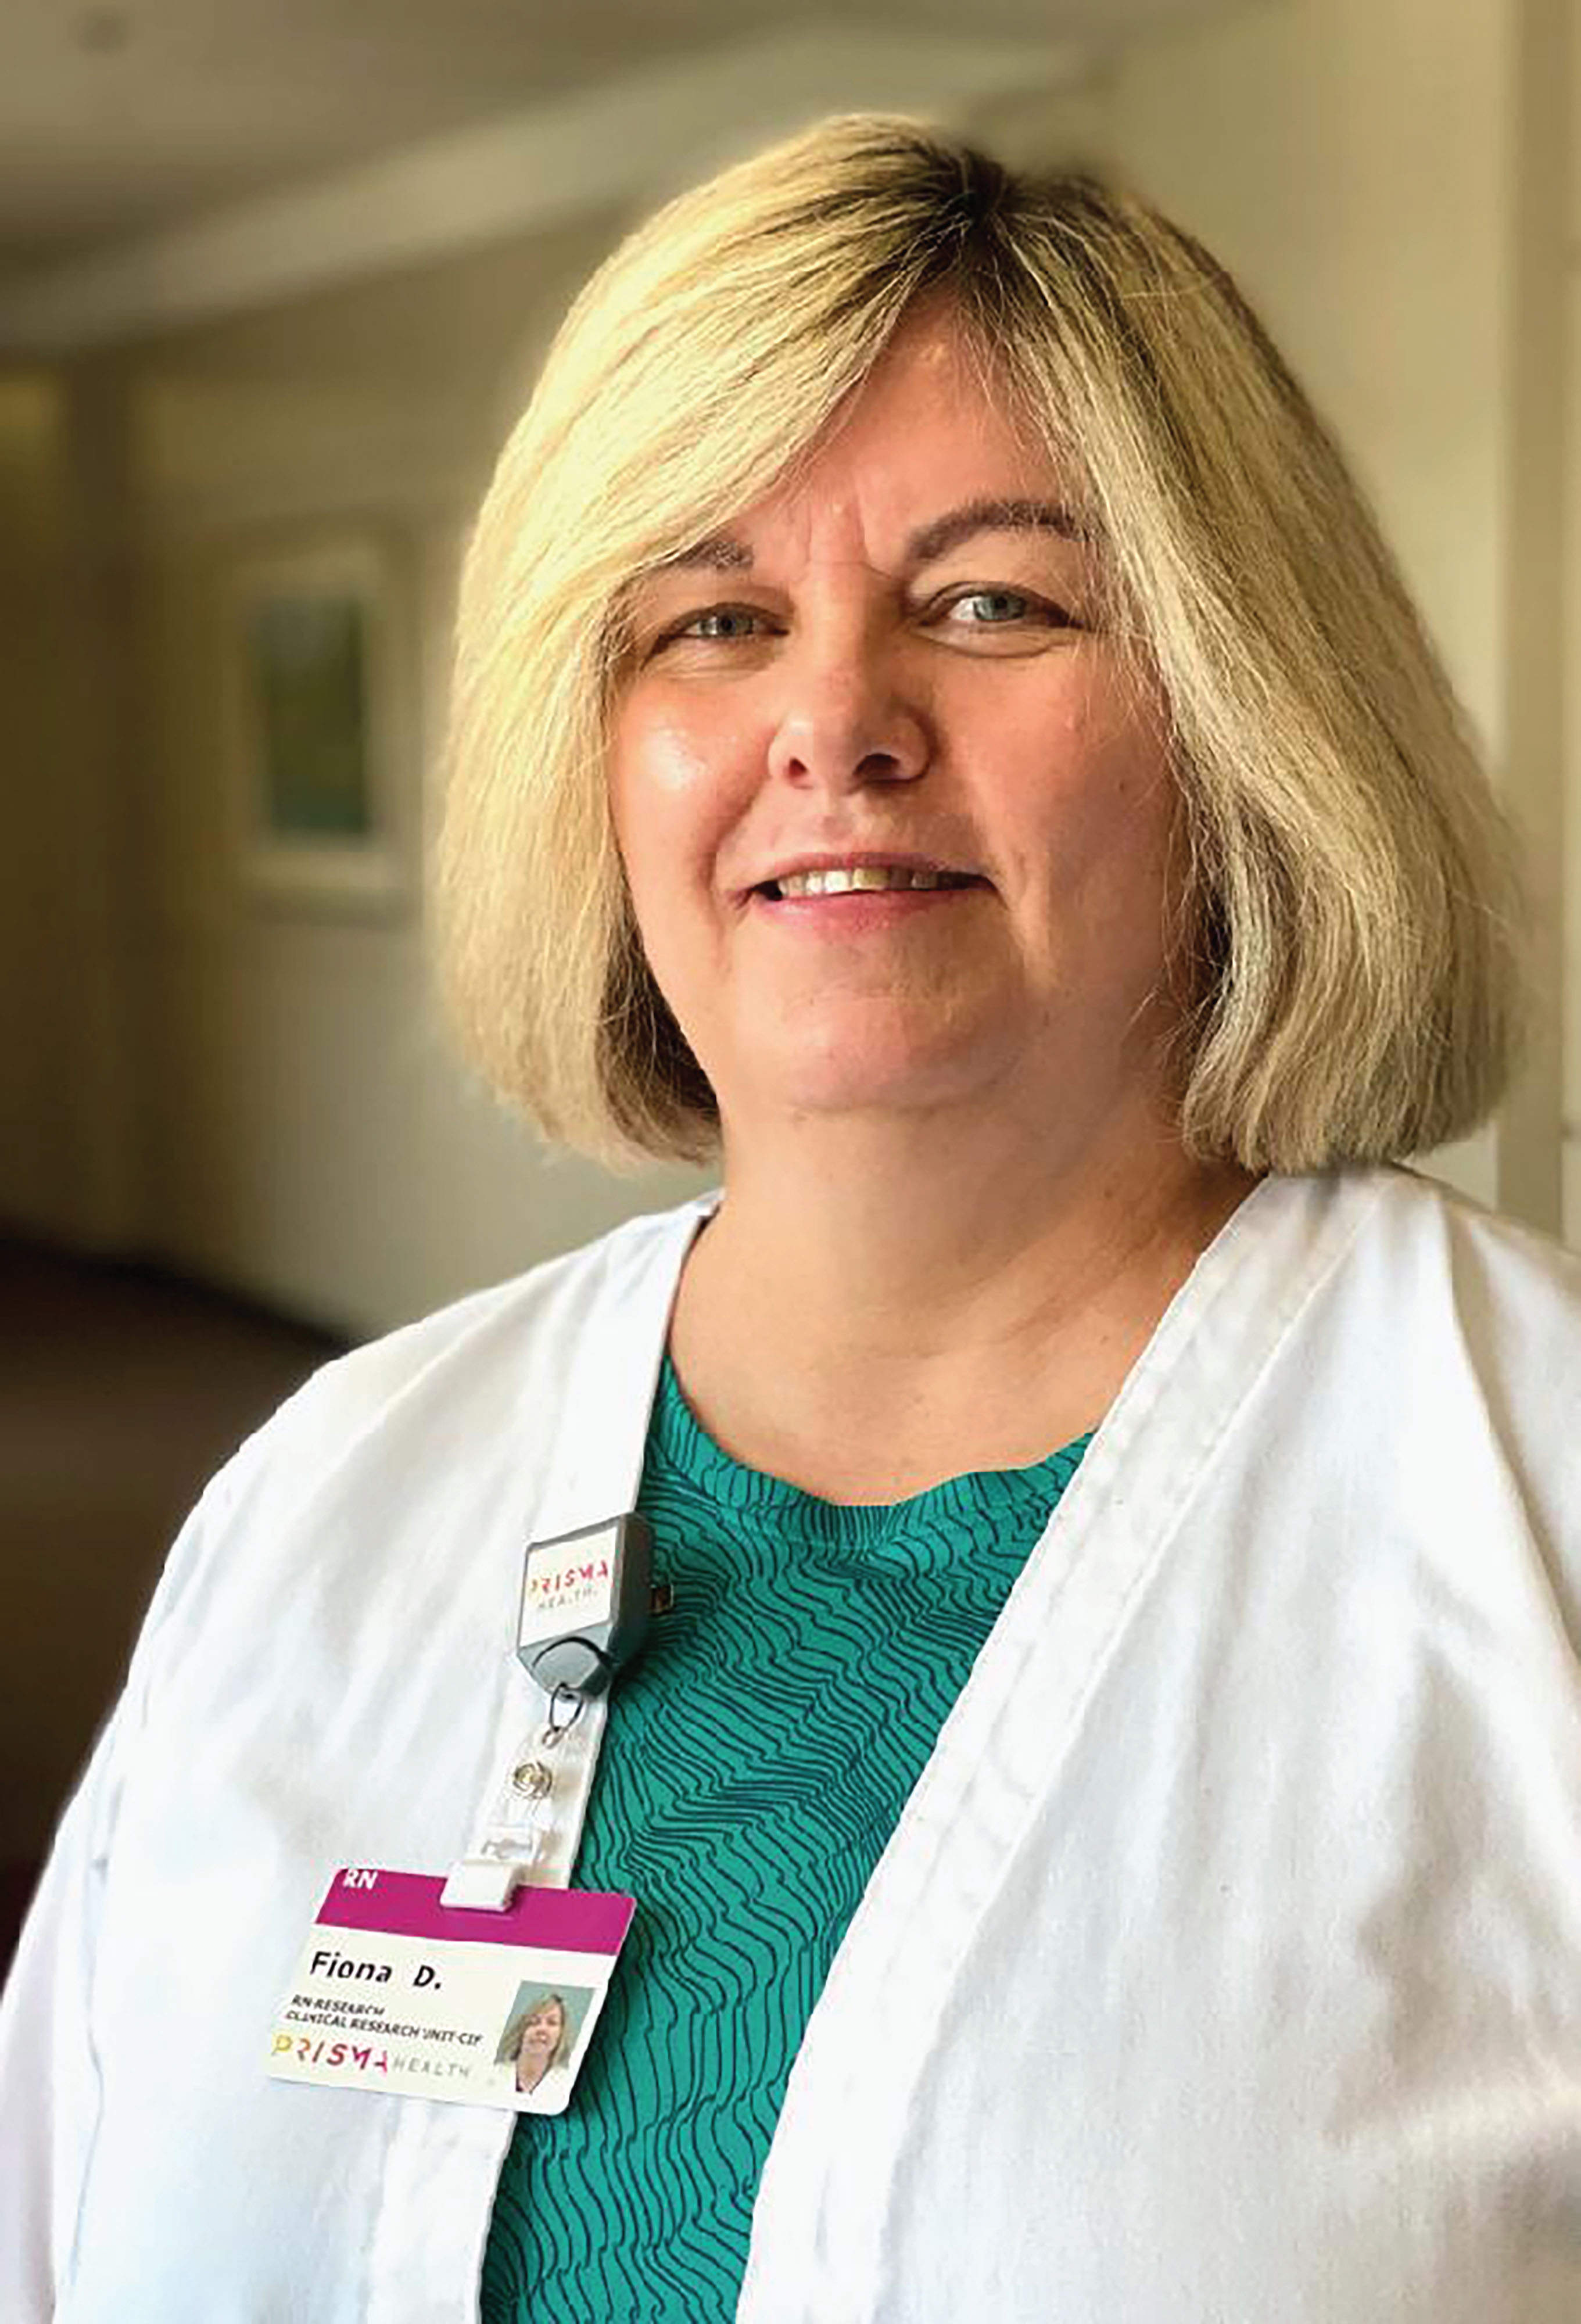 ONS member Fiona Davidson, BSN, RN, CTR, RN, nurse research coordinator at Prisma Health’s Institute for Translational Oncology Research and member of the South Carolina Upstate ONS Chapter